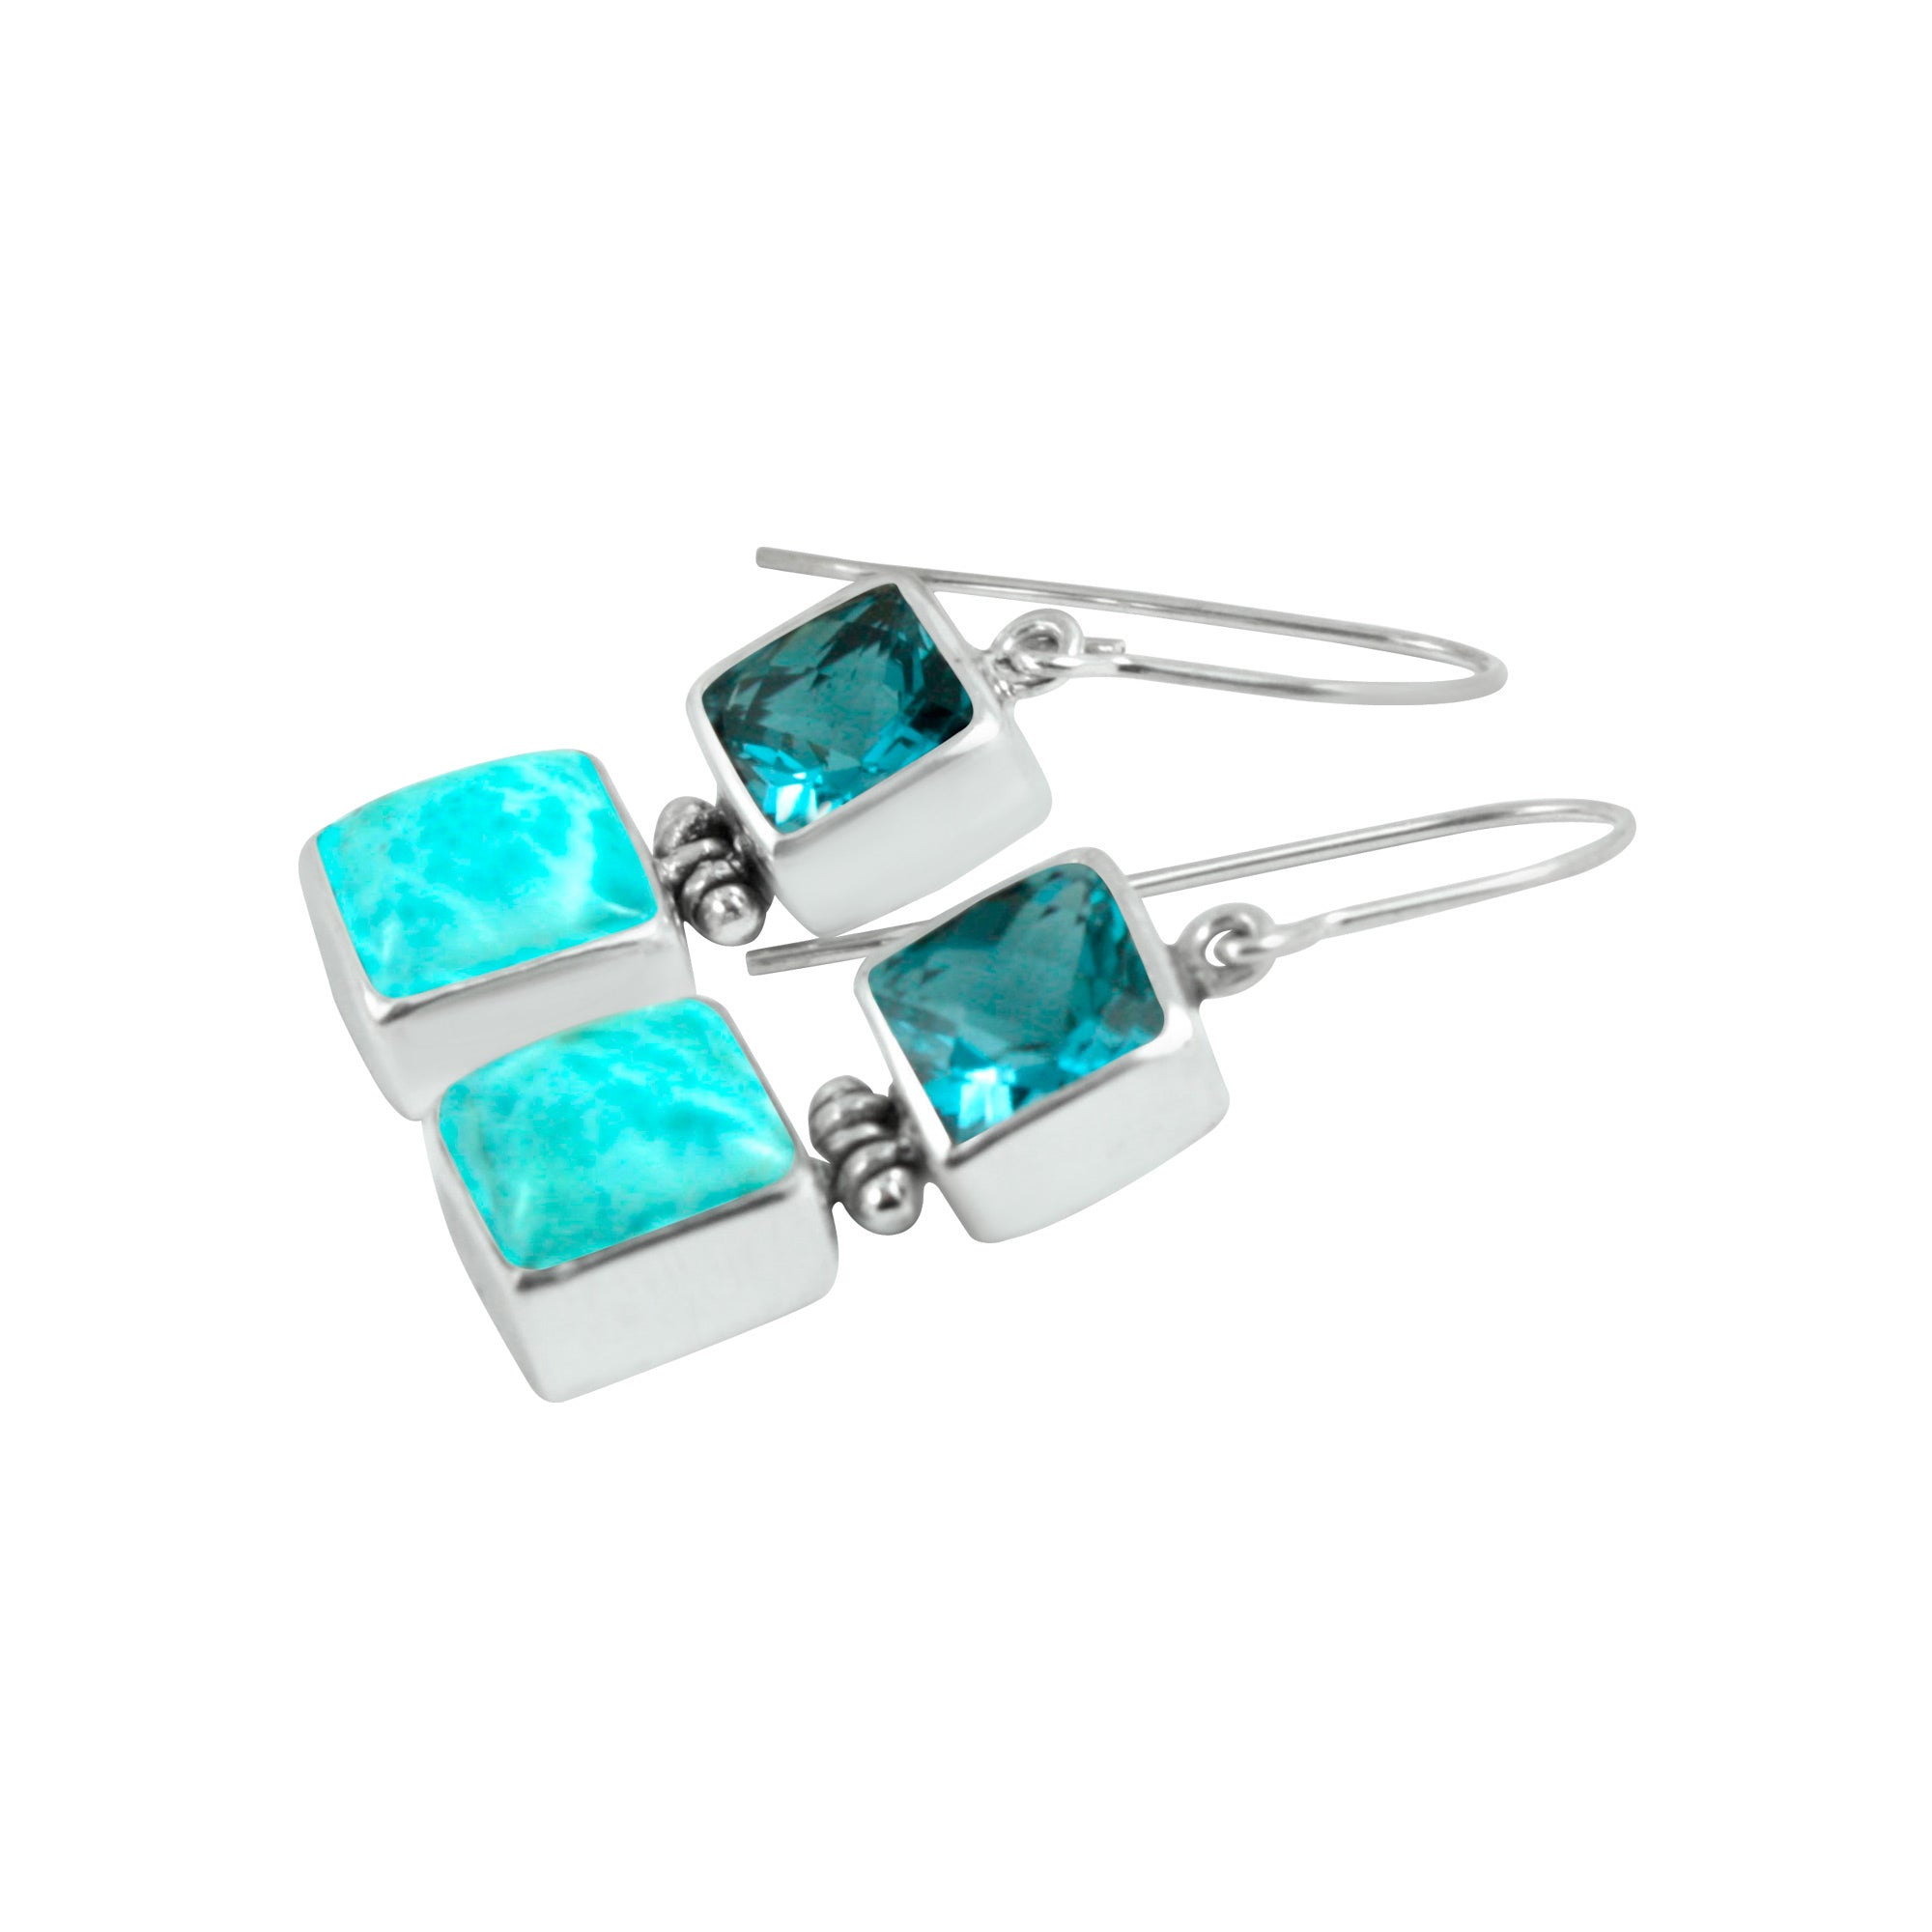 Stunning London Blue Topaz and Larimar silver earring